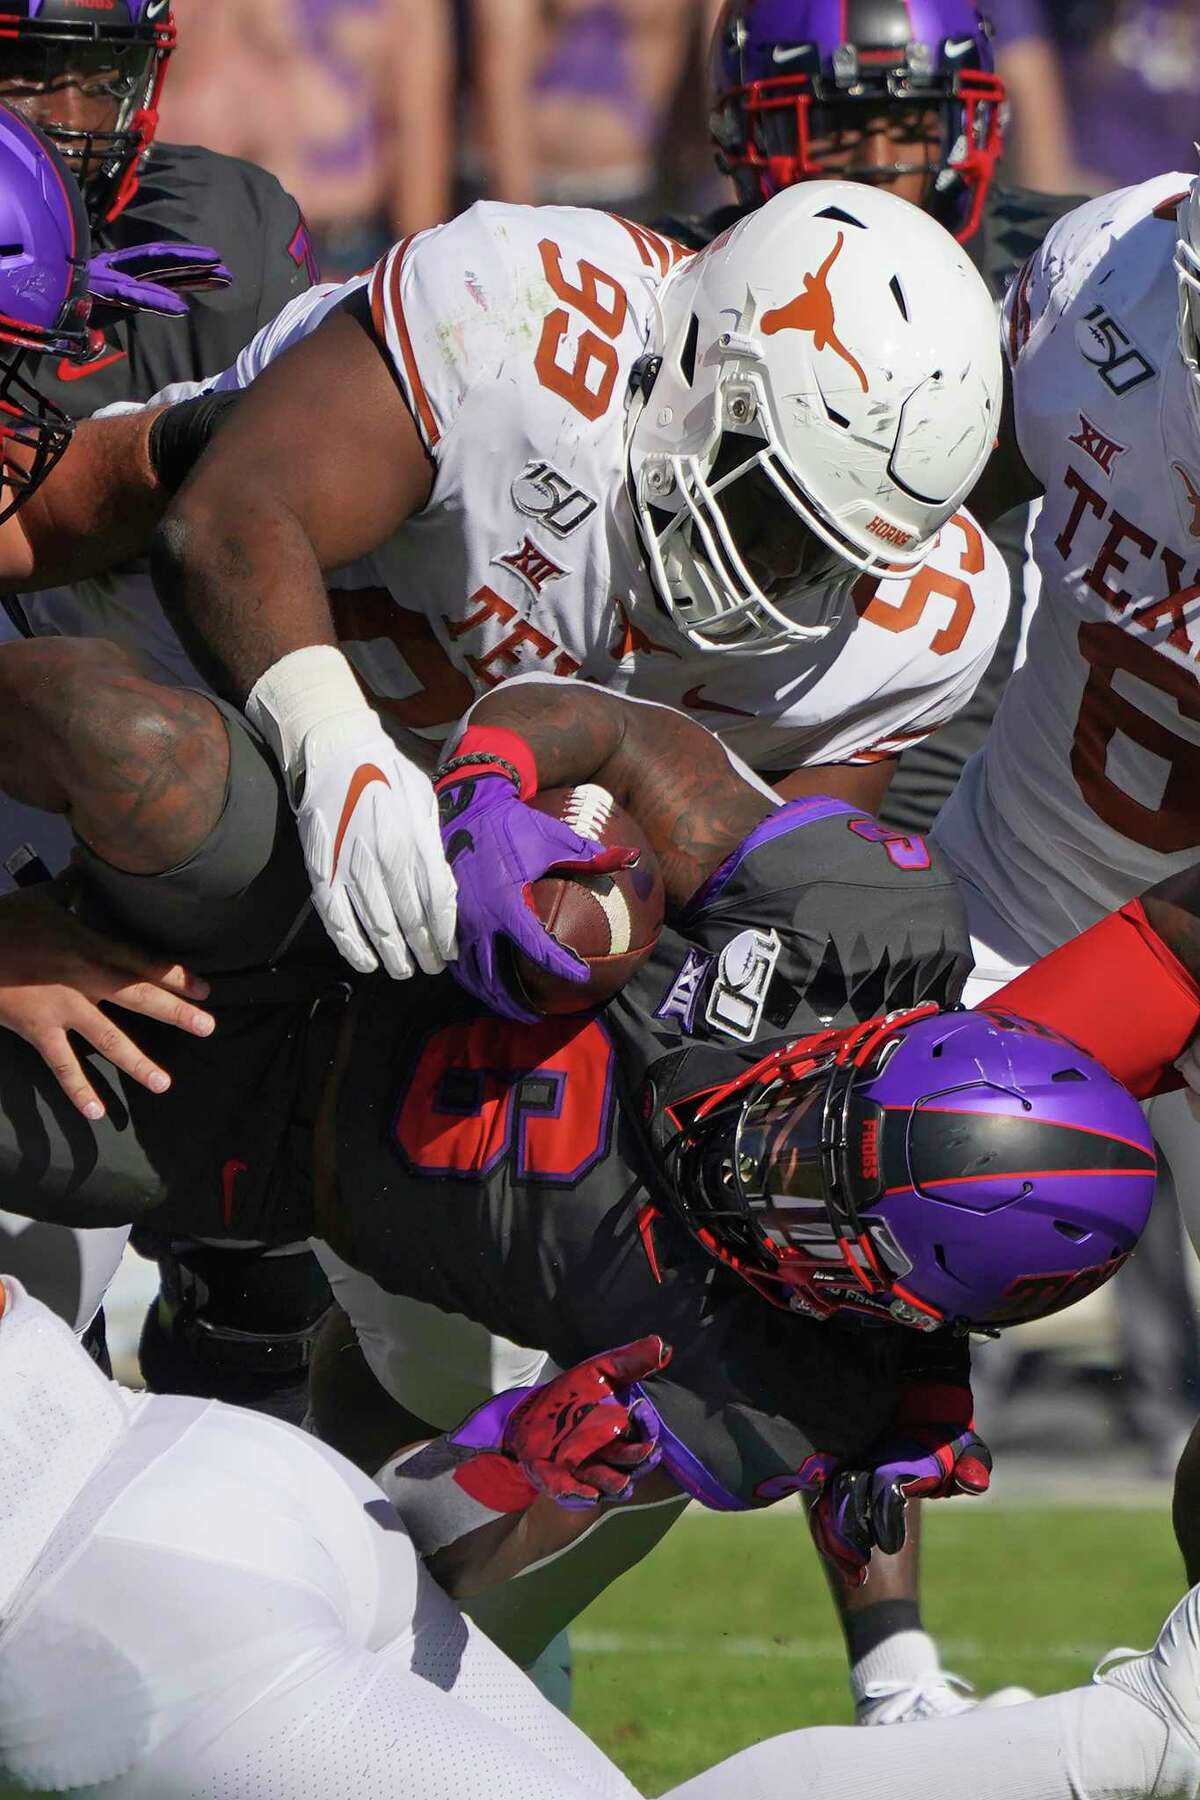 Texas defensive lineman Keondre Coburn (99) tackles TCU running back Darius Anderson (6) in the first half of an NCAA college football game in Fort Worth, Texas, Saturday, Oct. 26, 2019. (AP Photo/Louis DeLuca)